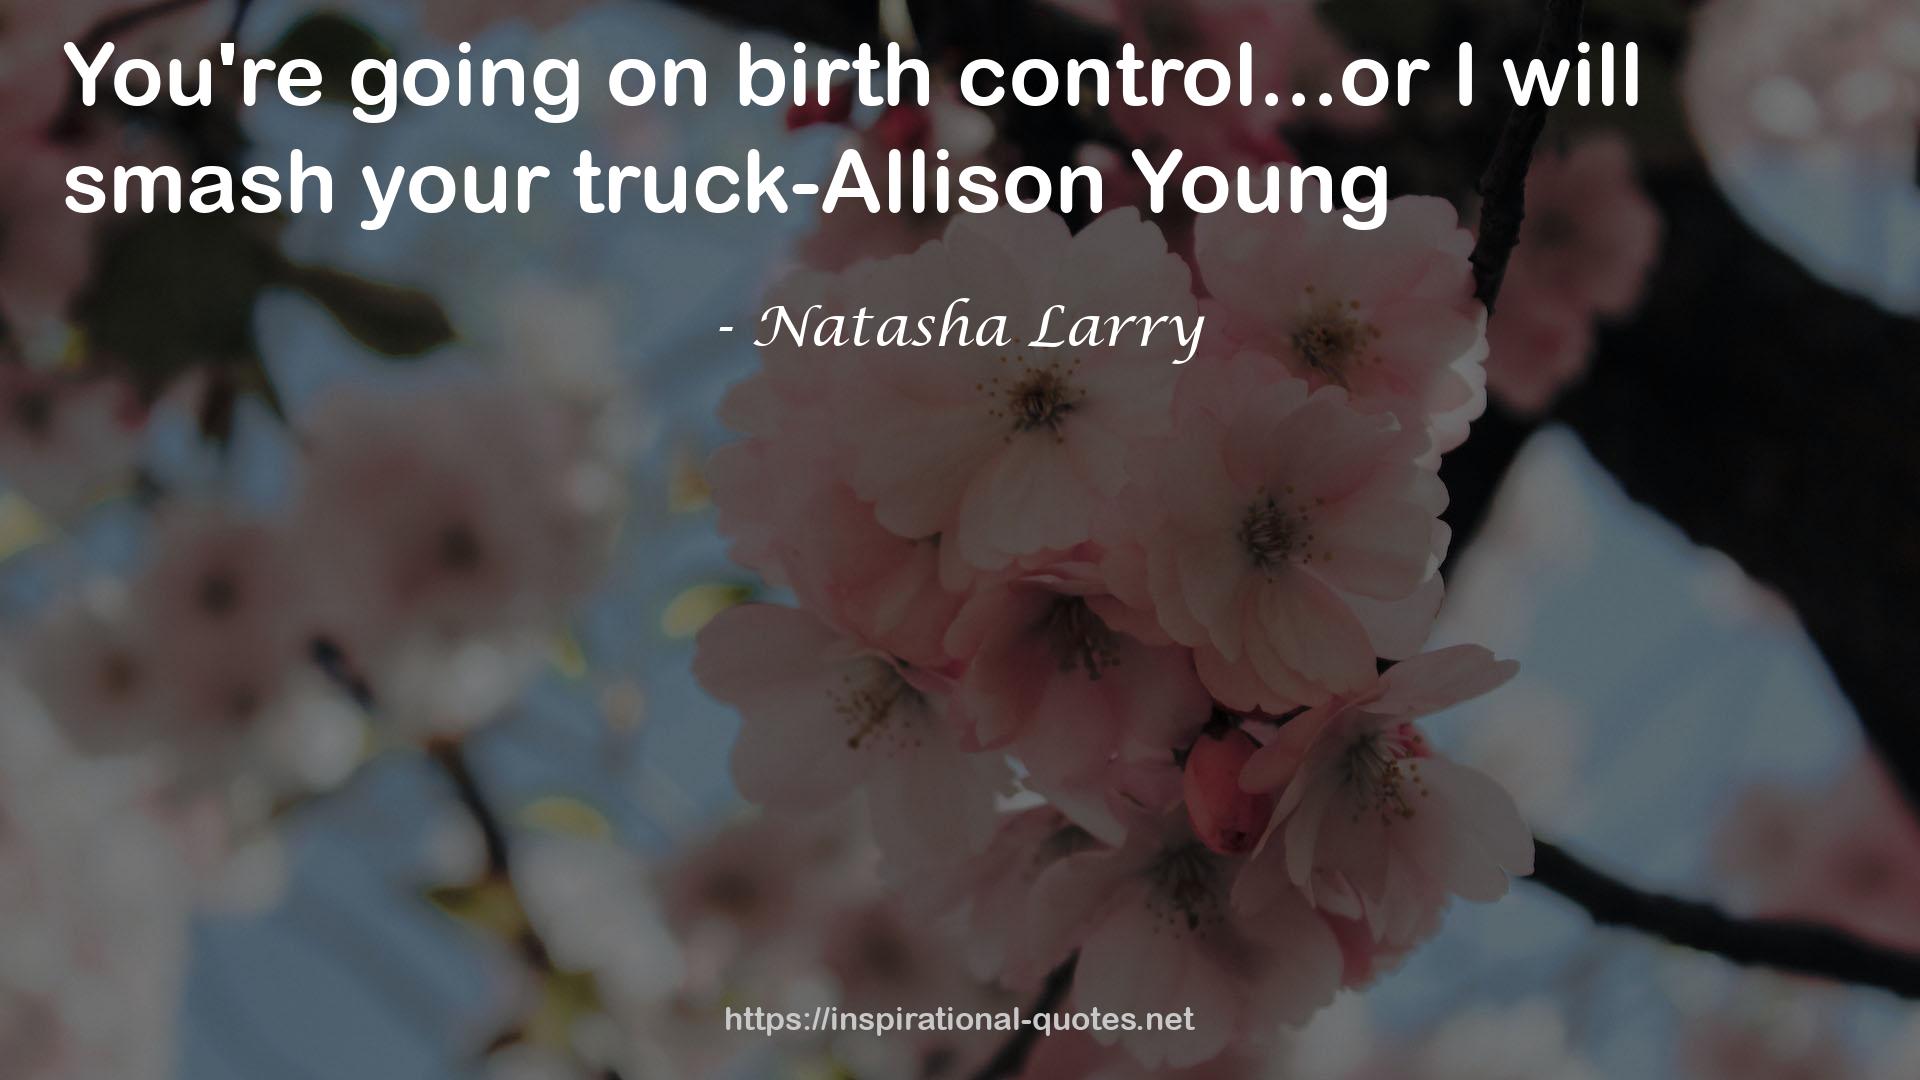 Natasha Larry quote : You're going on birth control...or I will smash your truck-Allison Young